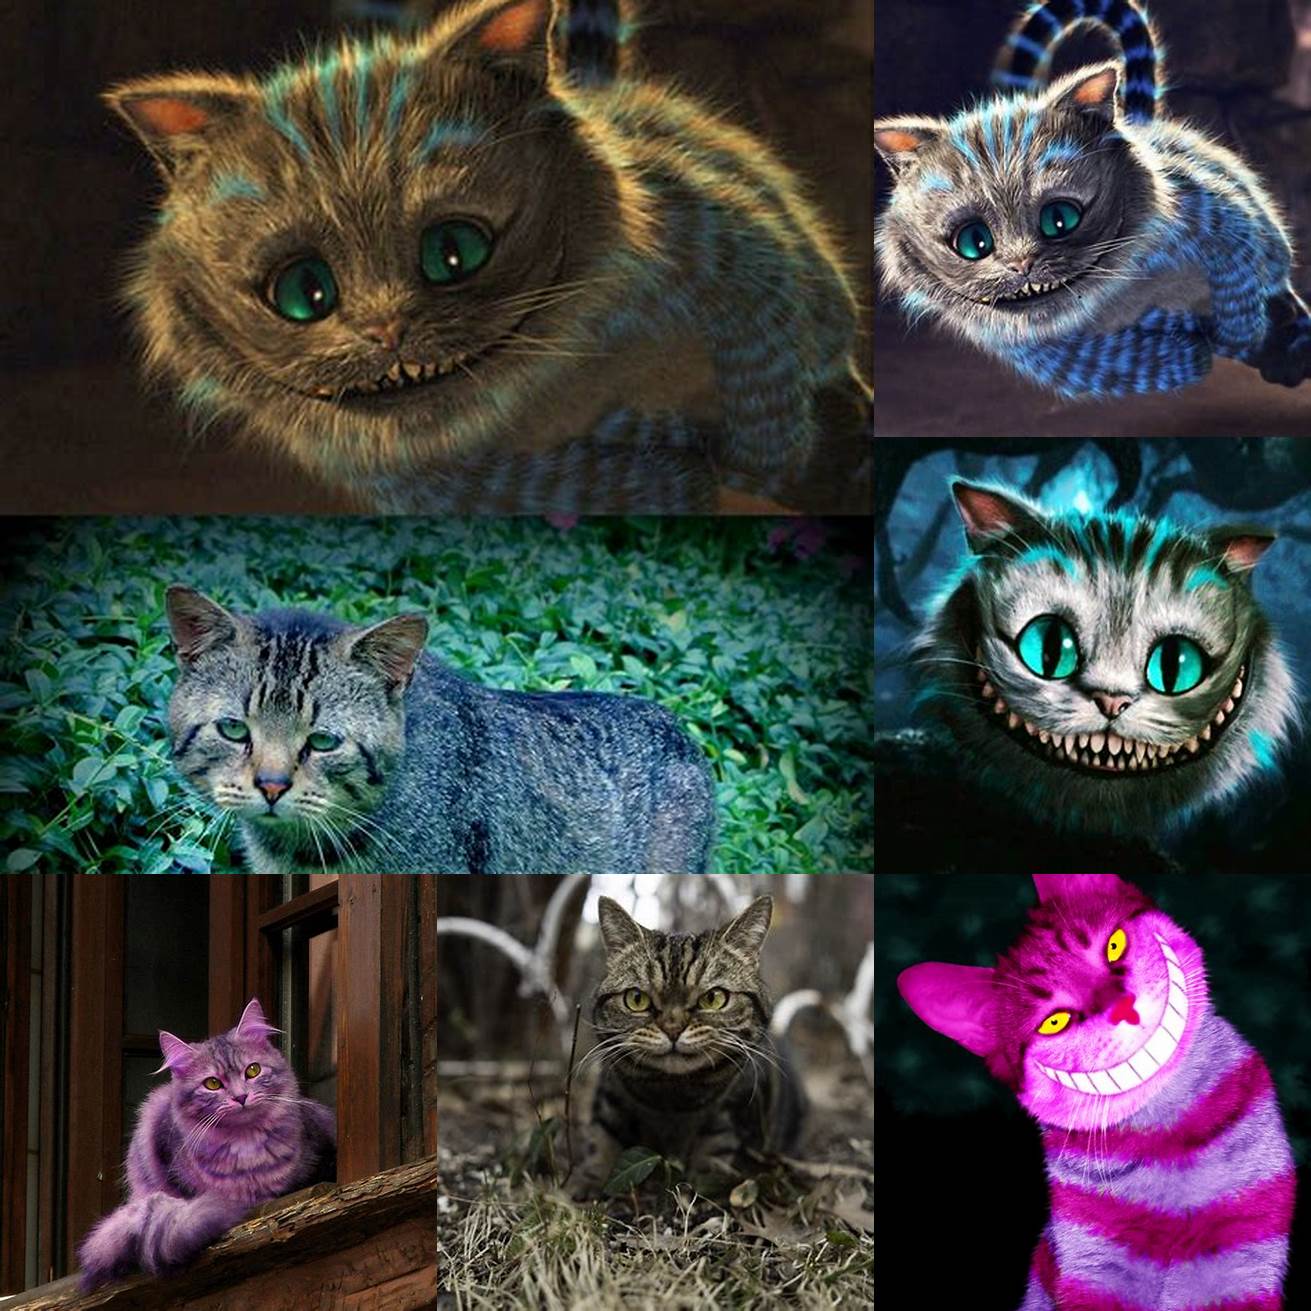 The Cheshire Cat was inspired by a real-life cat